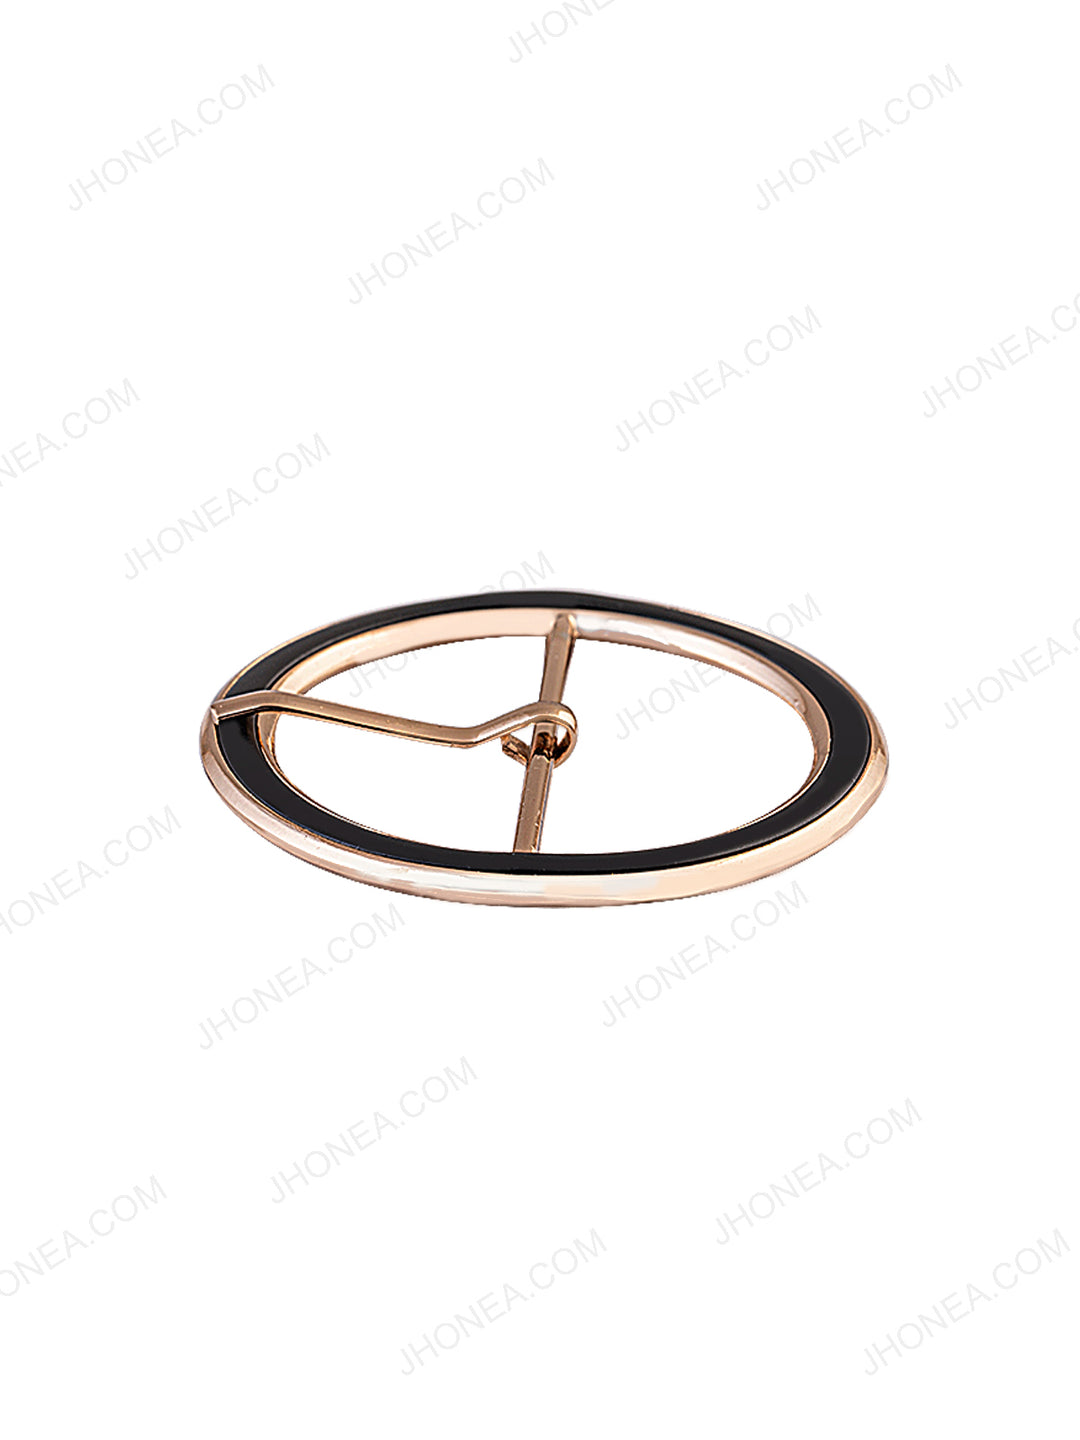 Circular Shiny Gold with Black Sliding Belt Buckle with Prong